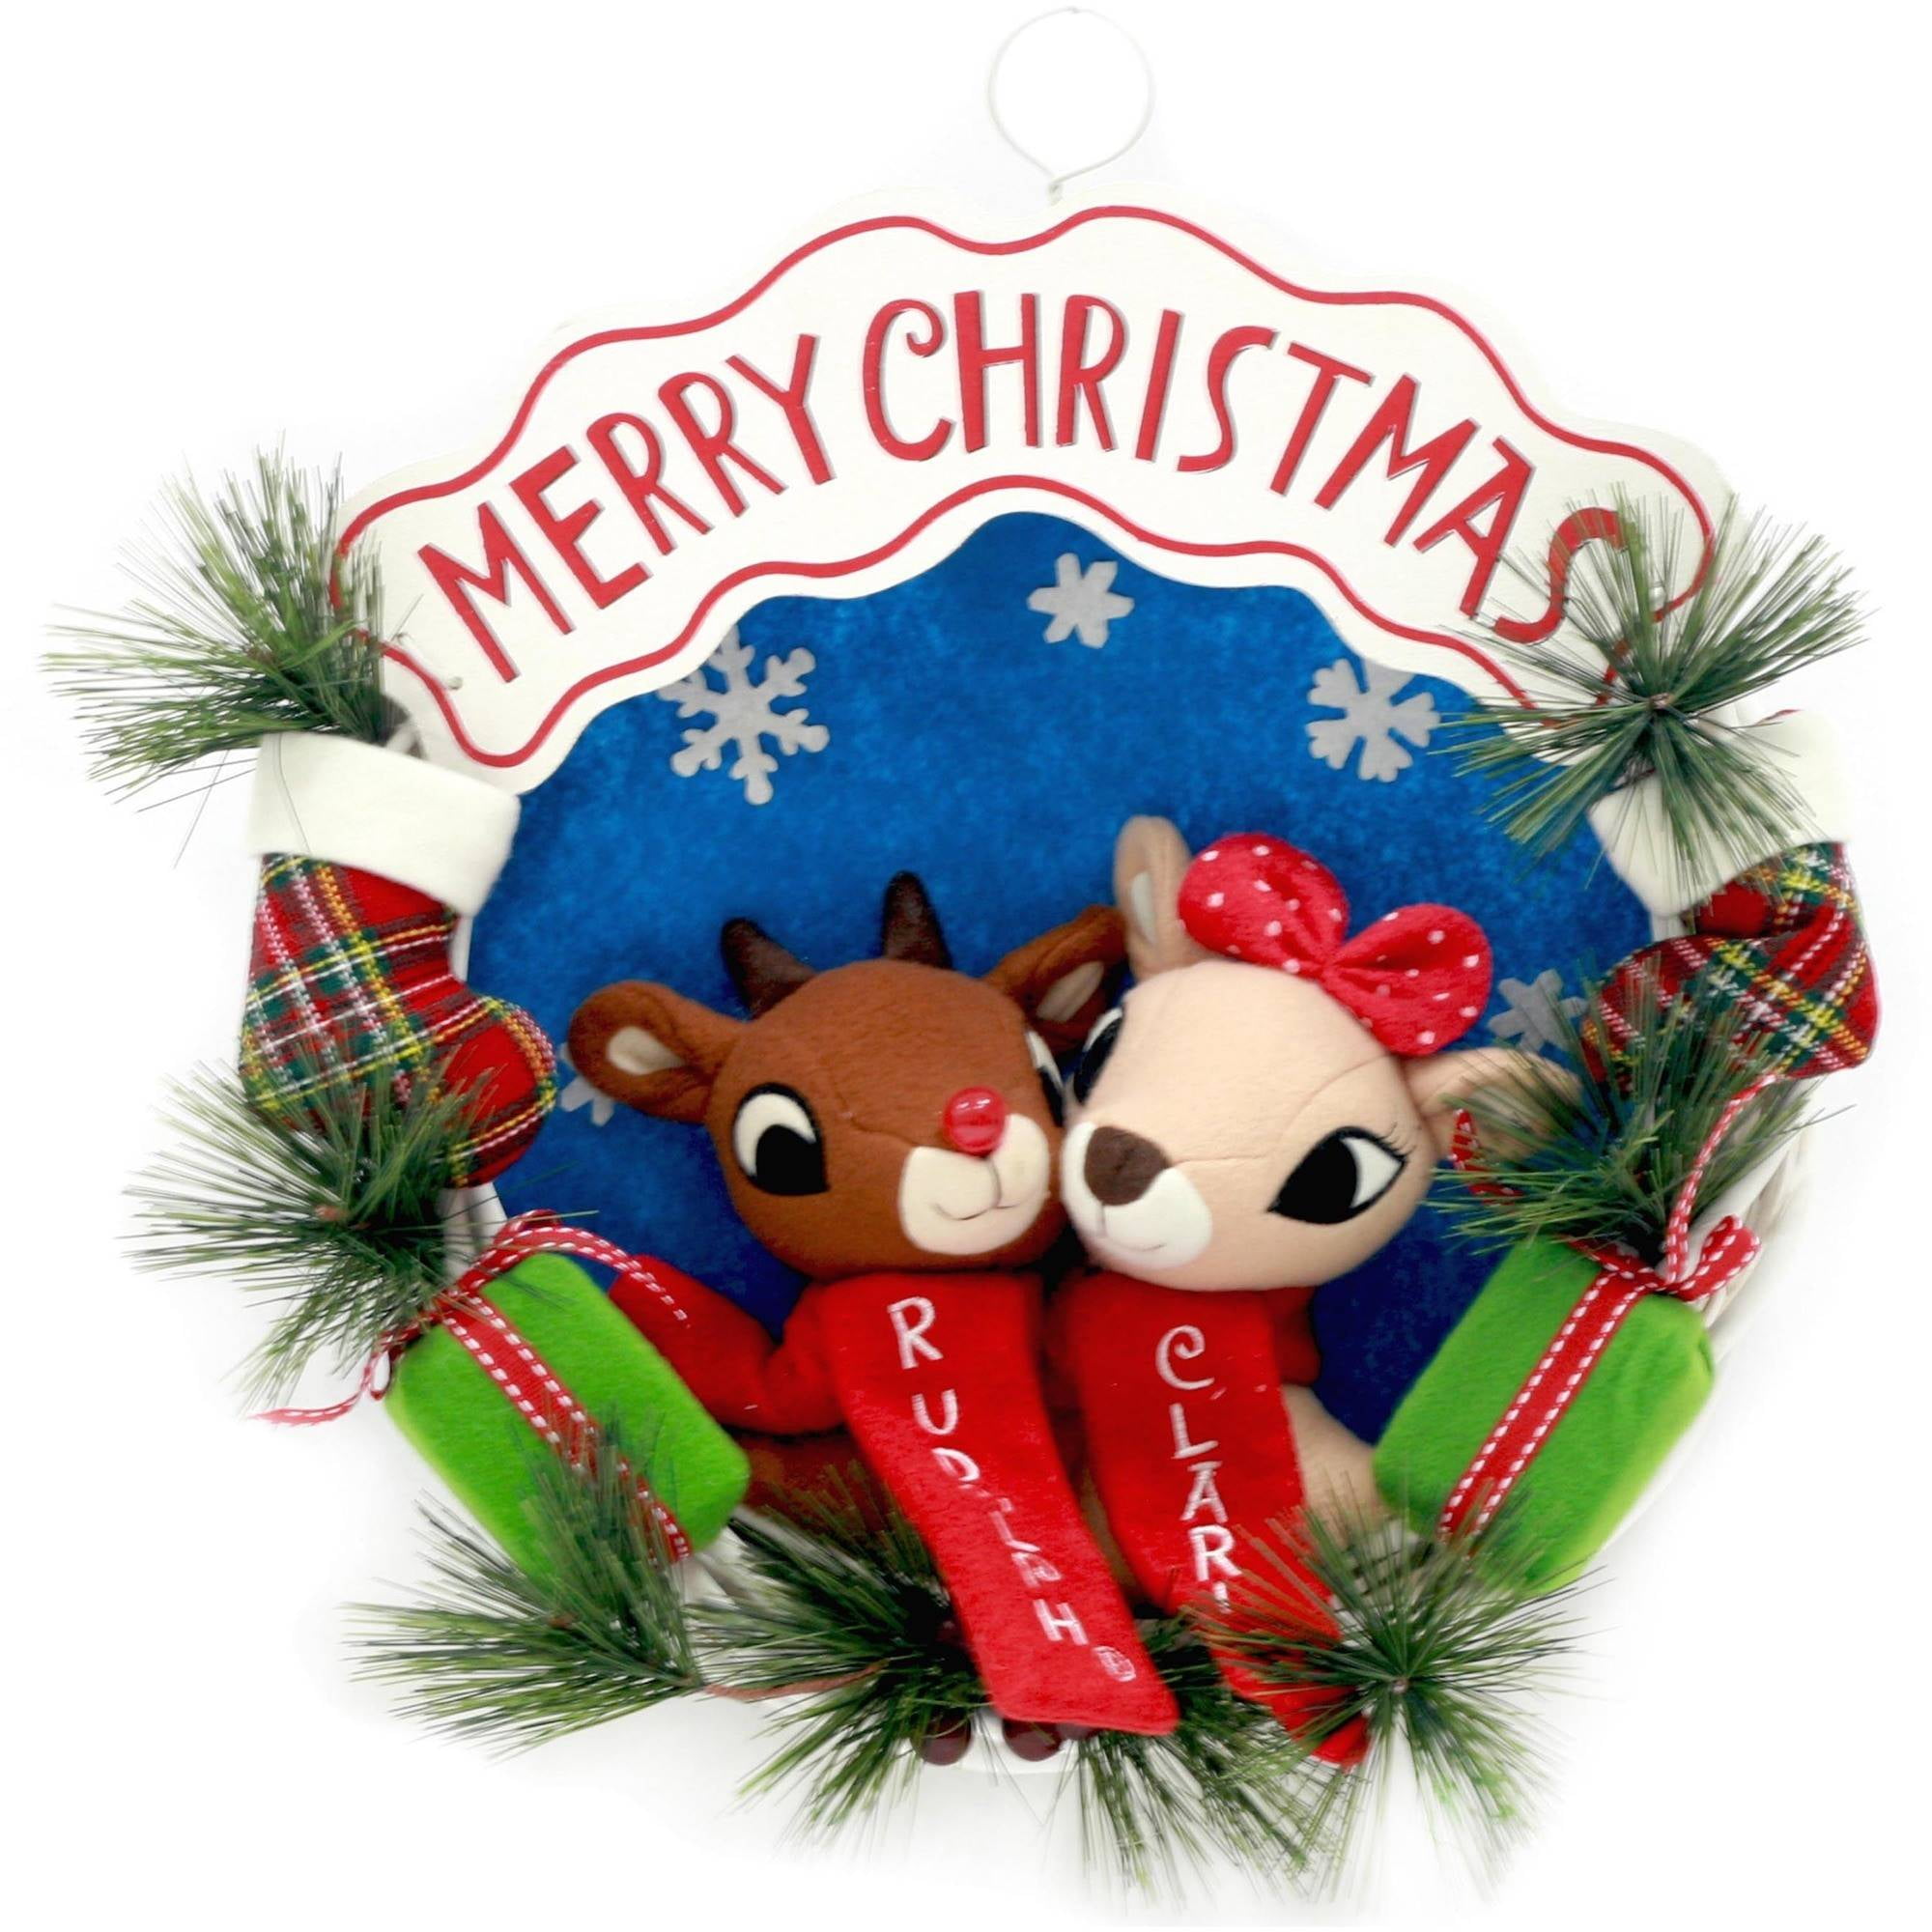 Details about   Rudolph The Red Nosed Reindeer Misfit Toys Deco Mesh Front Door Wreath Christmas 